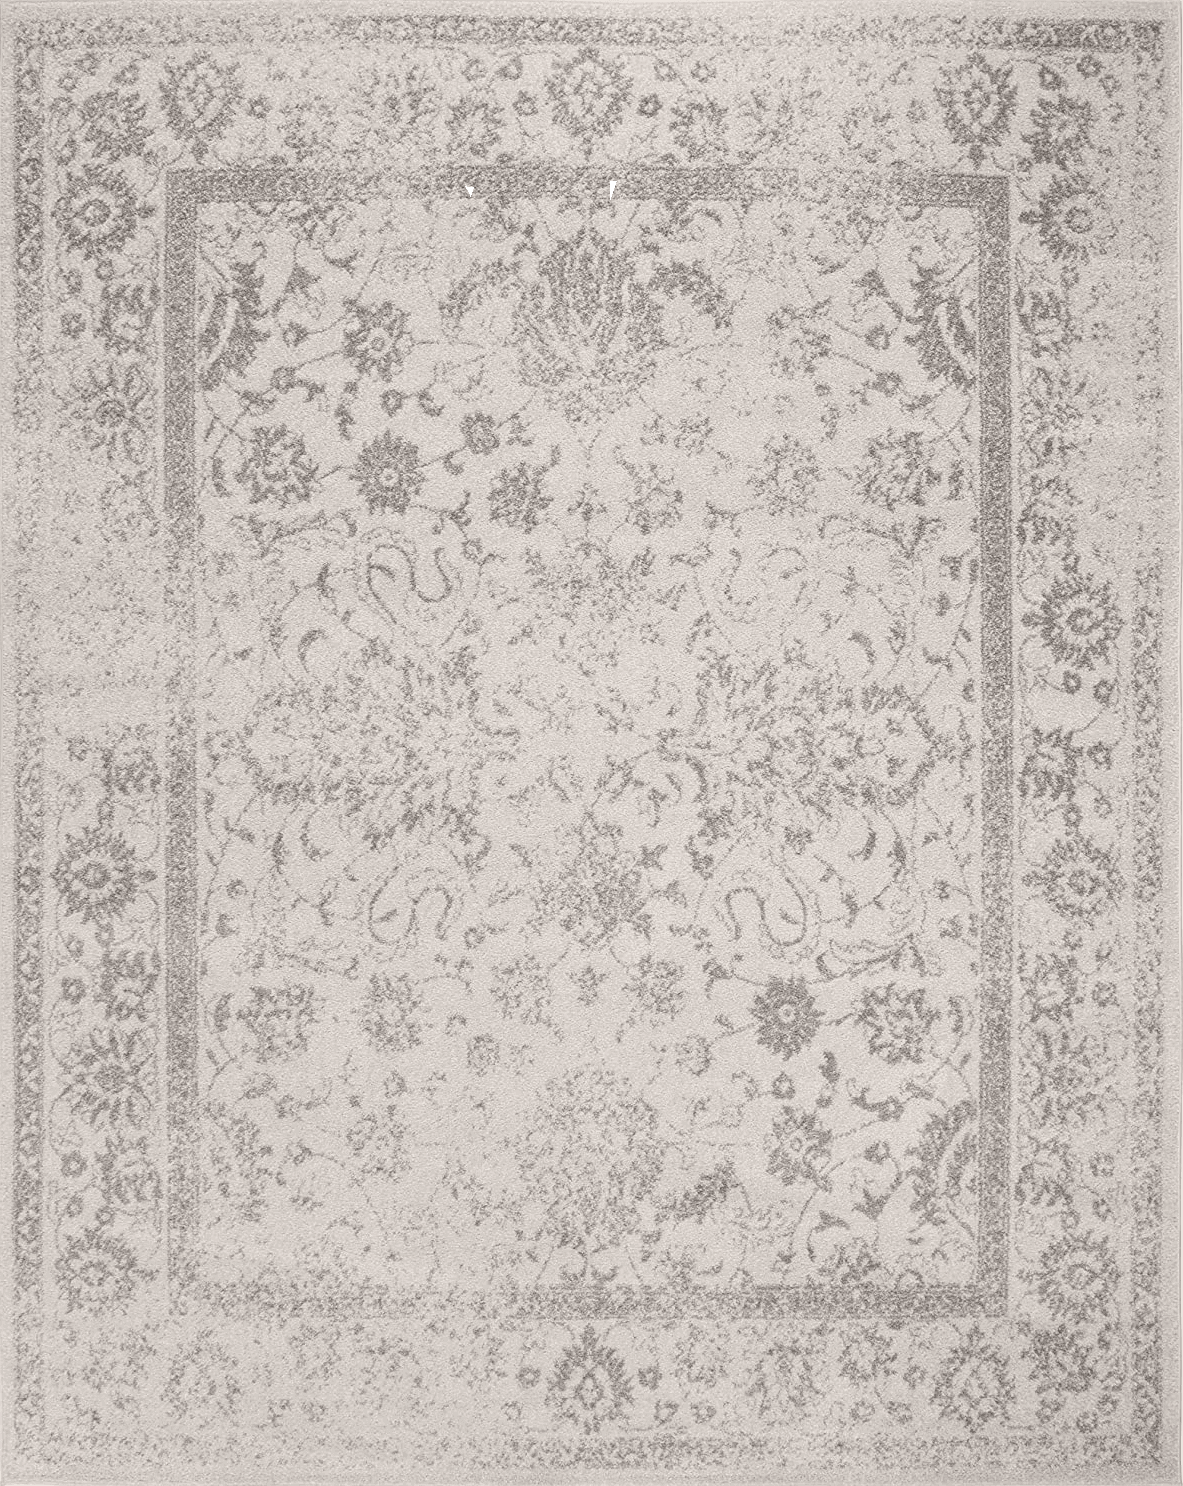 ‎Ivory/Silver ‎Traditional ‎Non Slip ‎Living Room ‎Area Rug